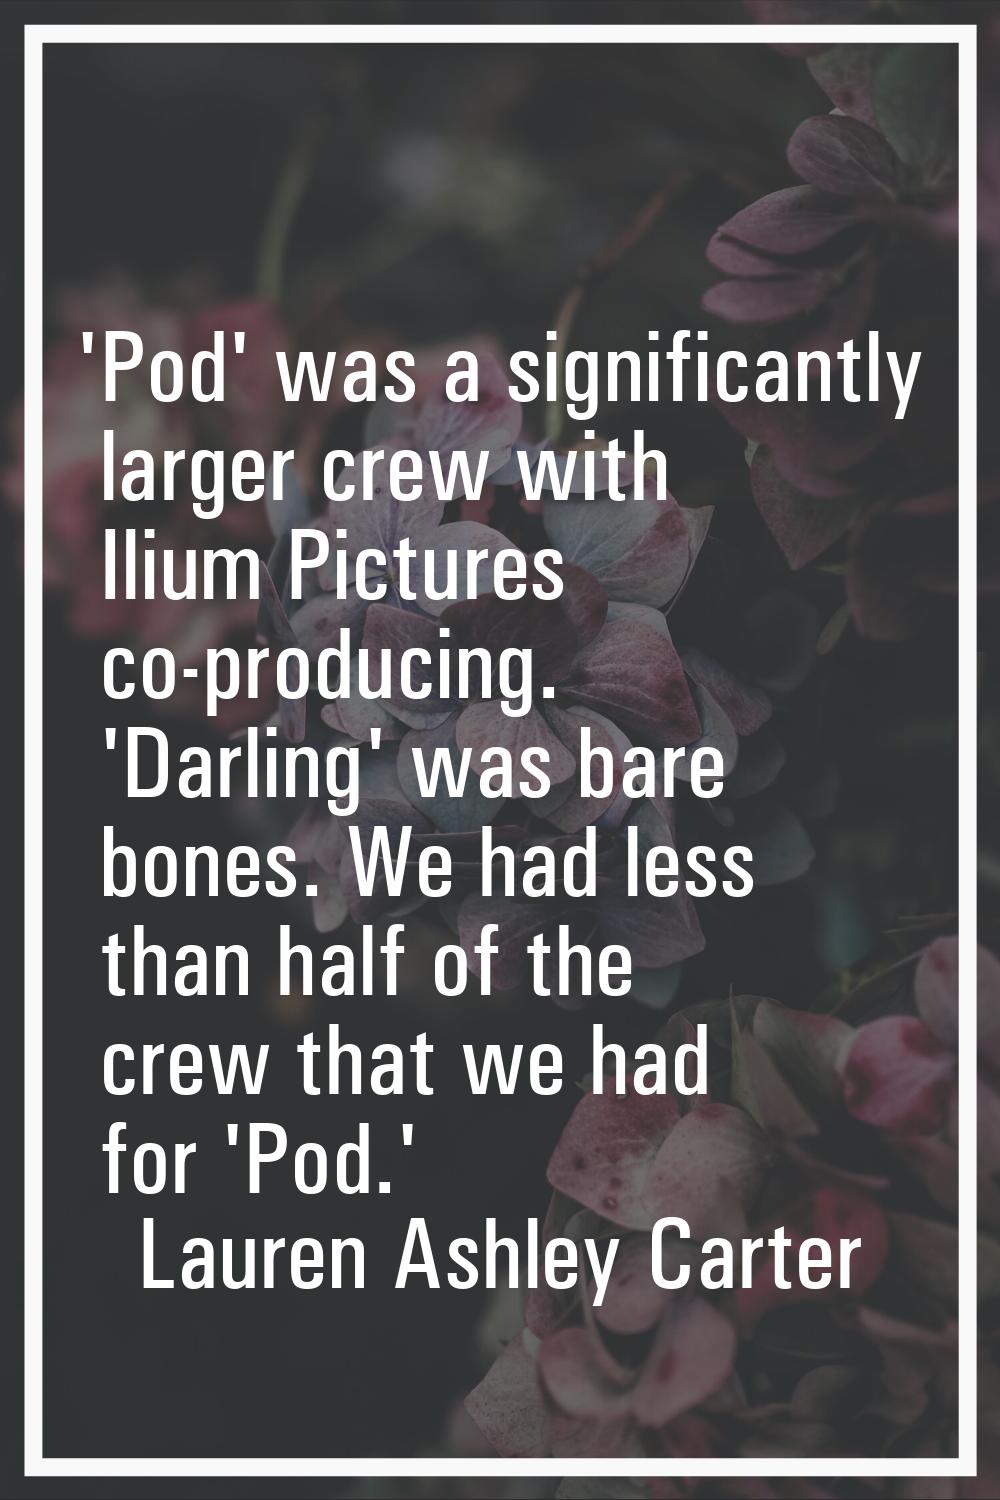 'Pod' was a significantly larger crew with Ilium Pictures co-producing. 'Darling' was bare bones. W